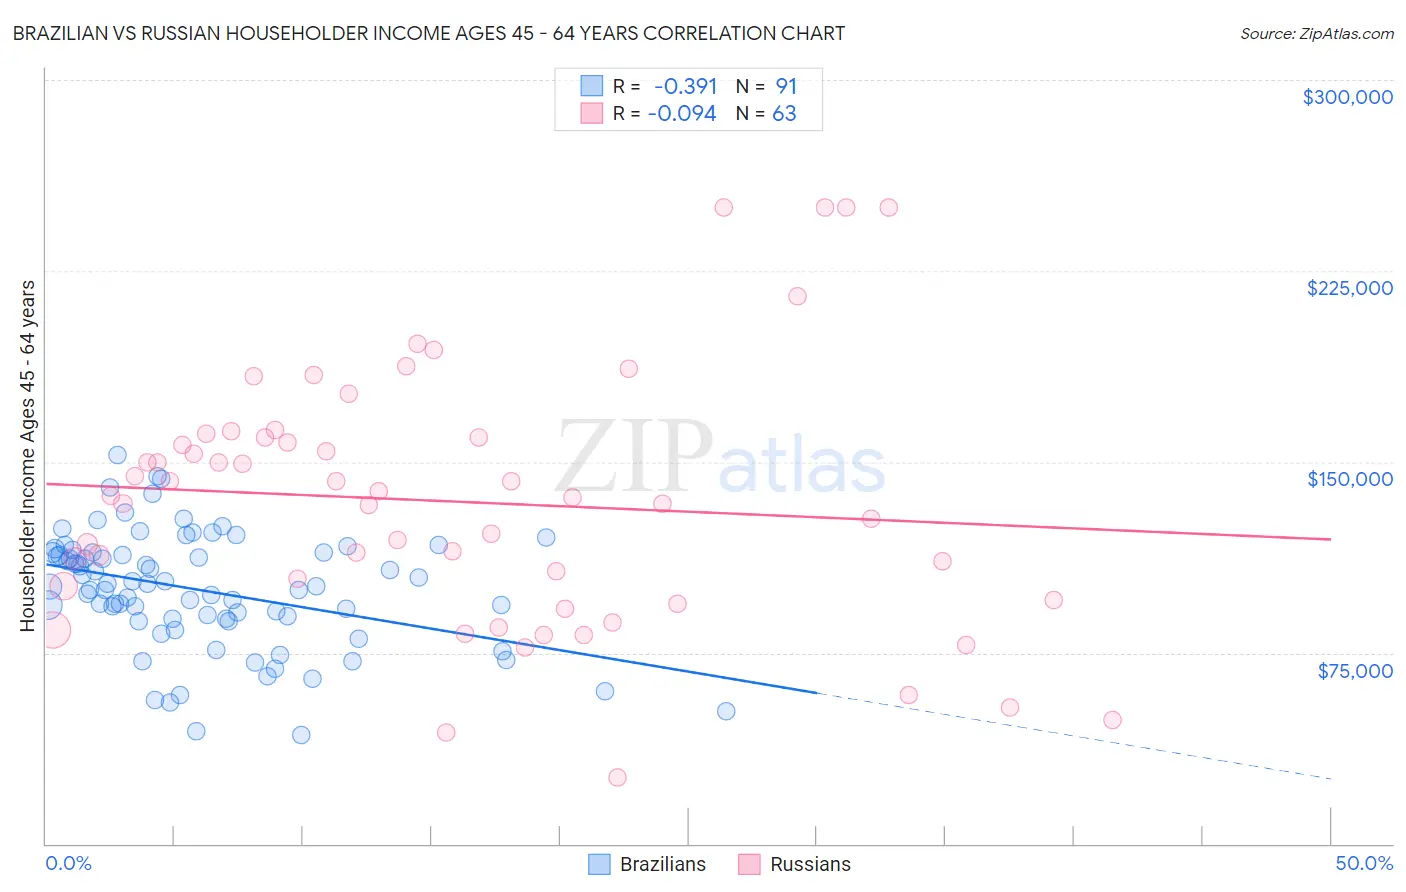 Brazilian vs Russian Householder Income Ages 45 - 64 years